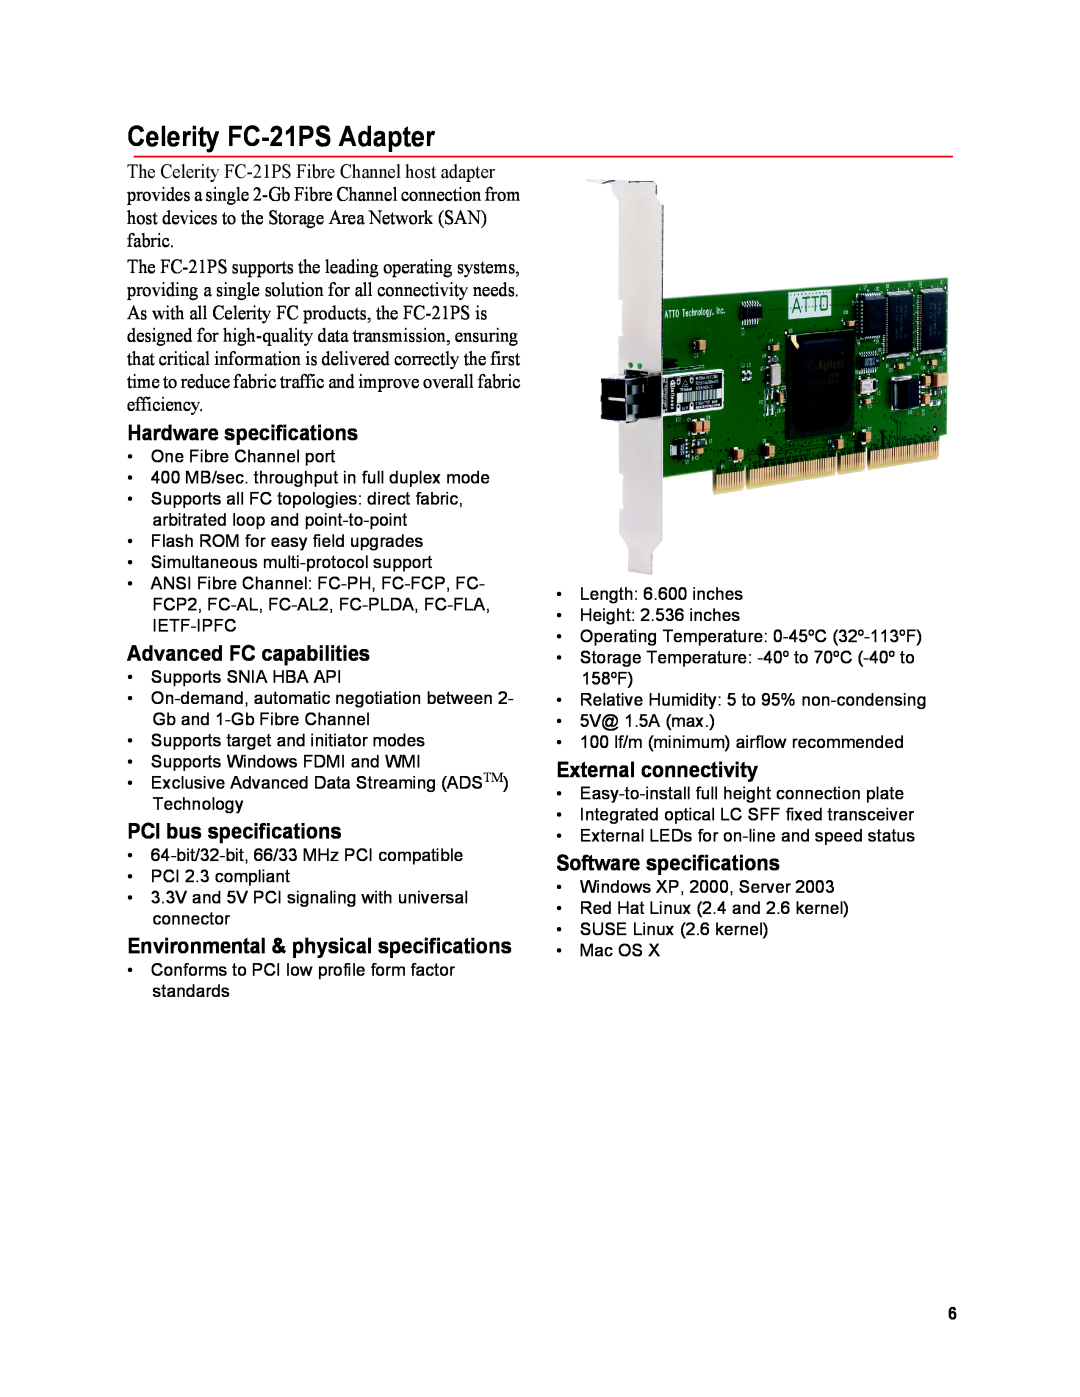 ATTO Technology FC-44ES 4-Gb operation manual Celerity FC-21PS Adapter, Hardware specifications, Advanced FC capabilities 